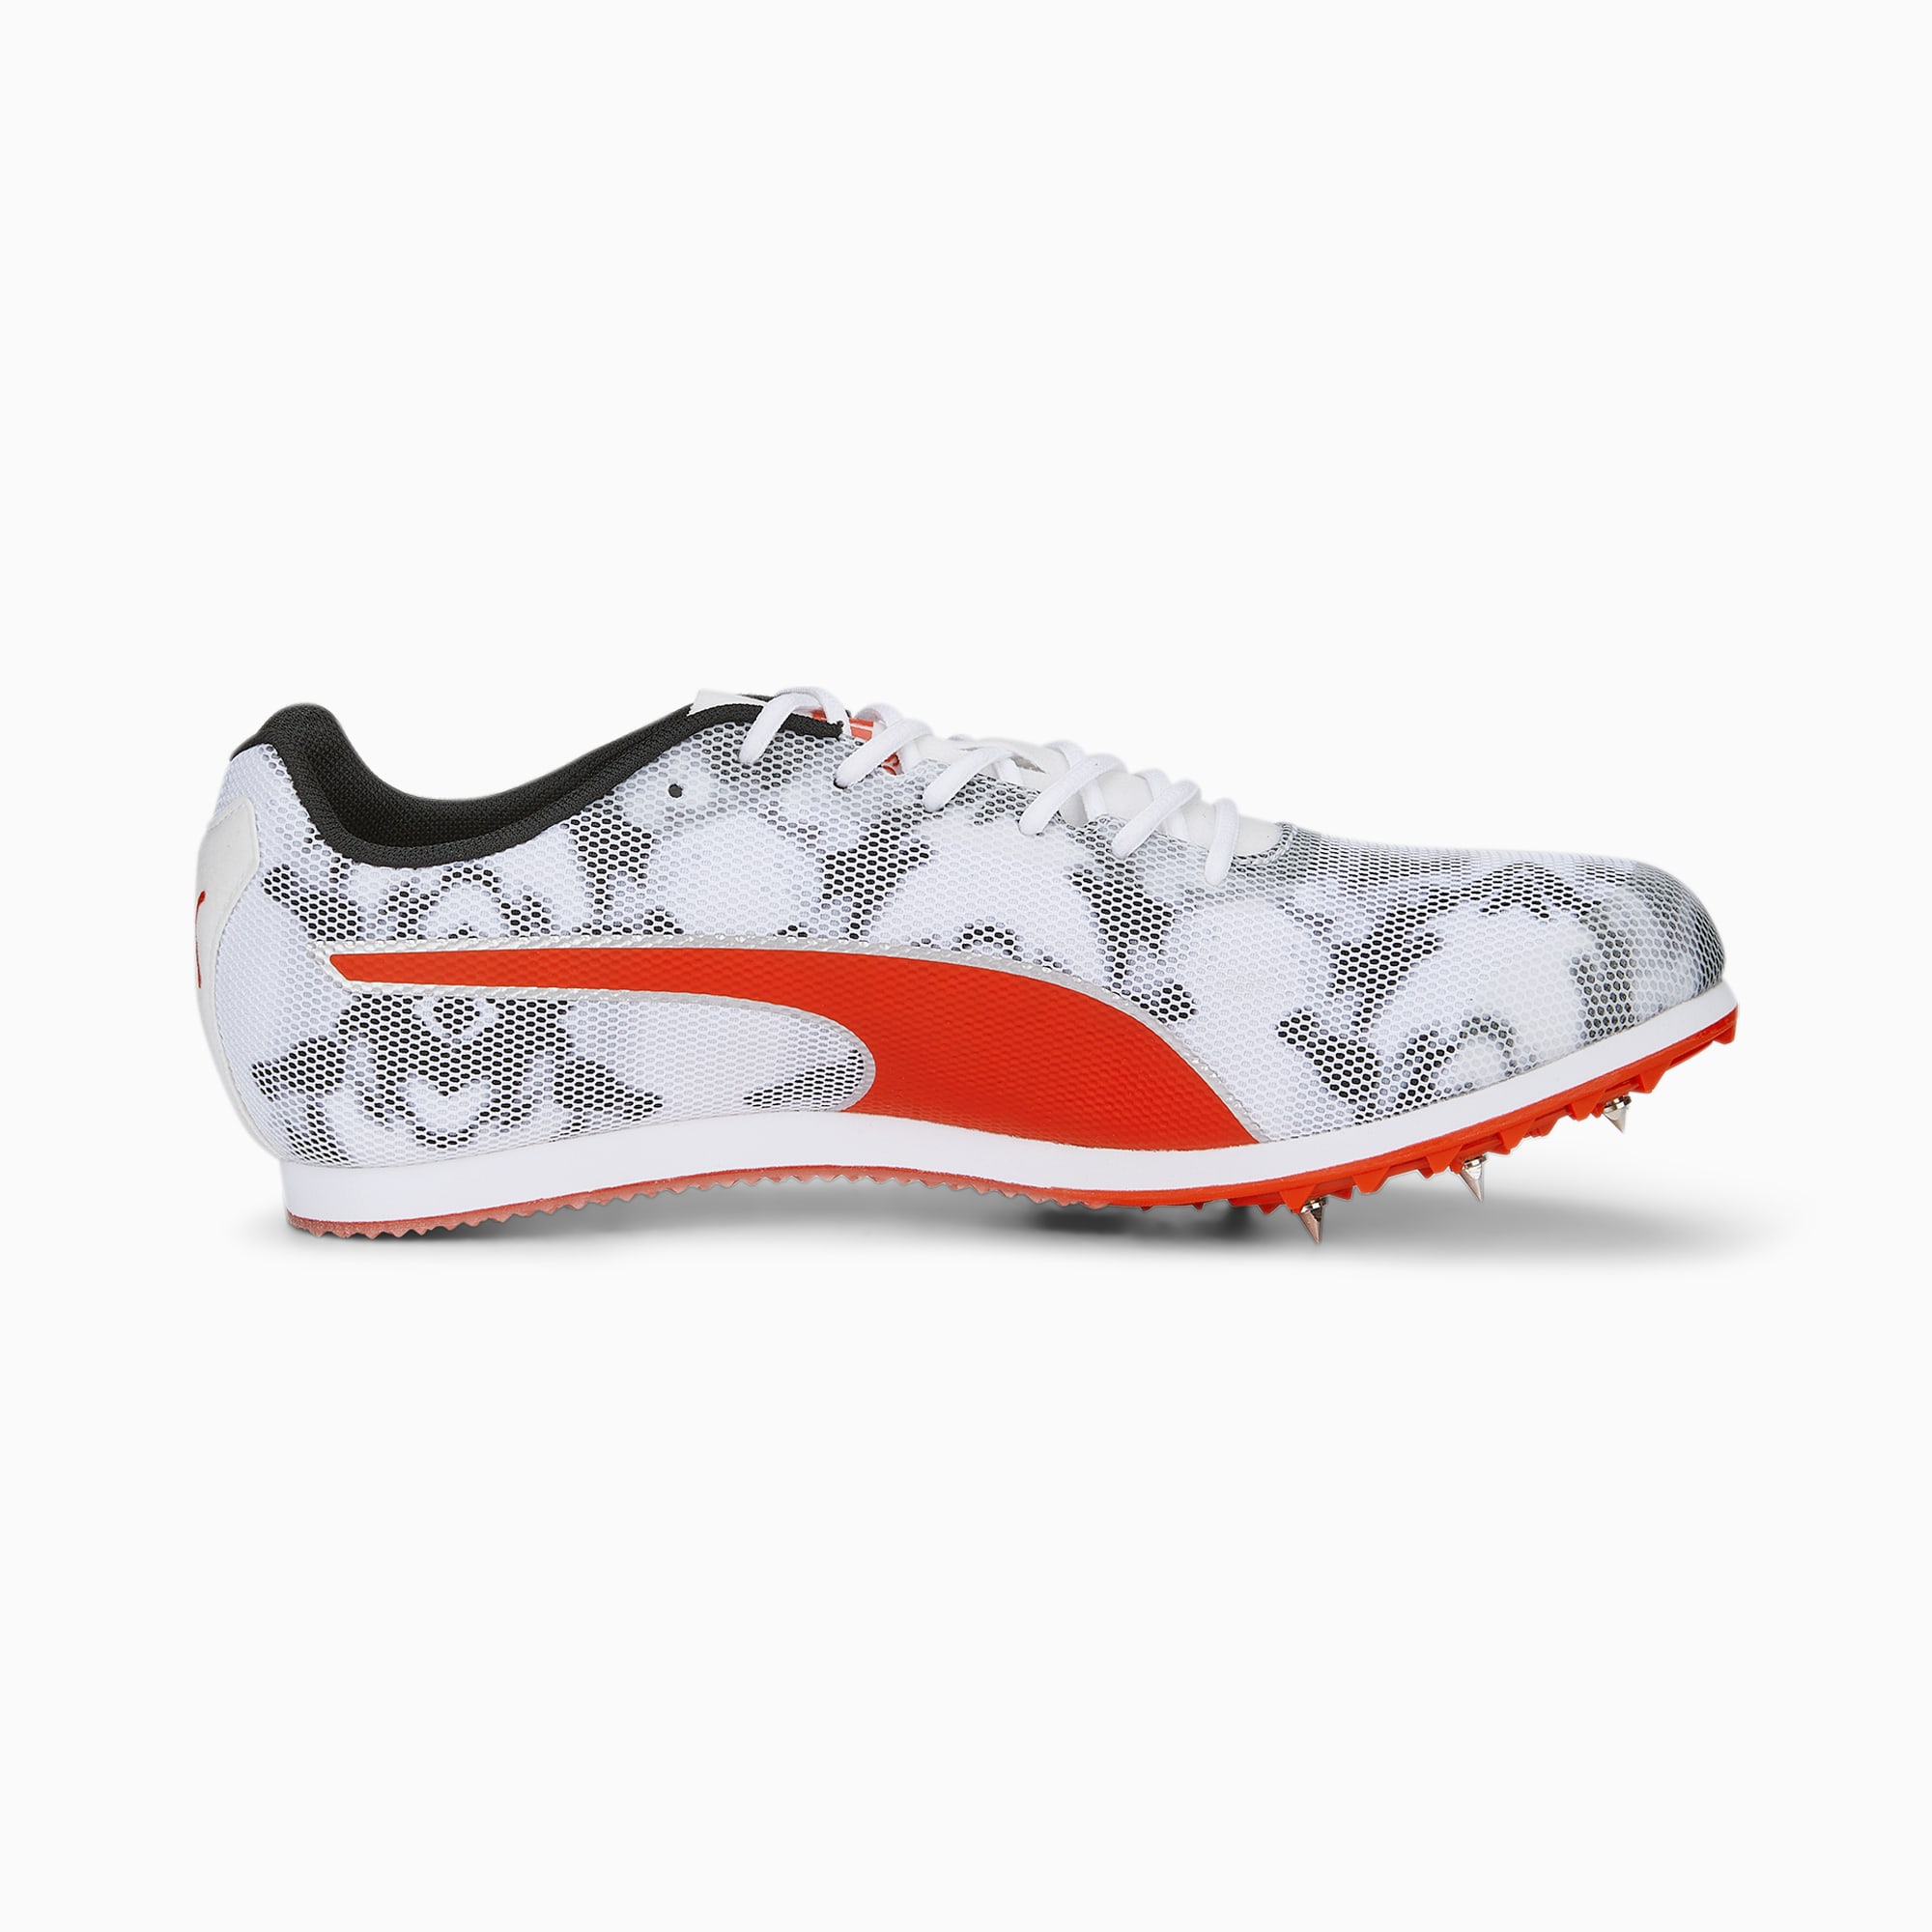 Women's PUMA Evospeed Star 8 Track And Field Shoes, Black/White/Red